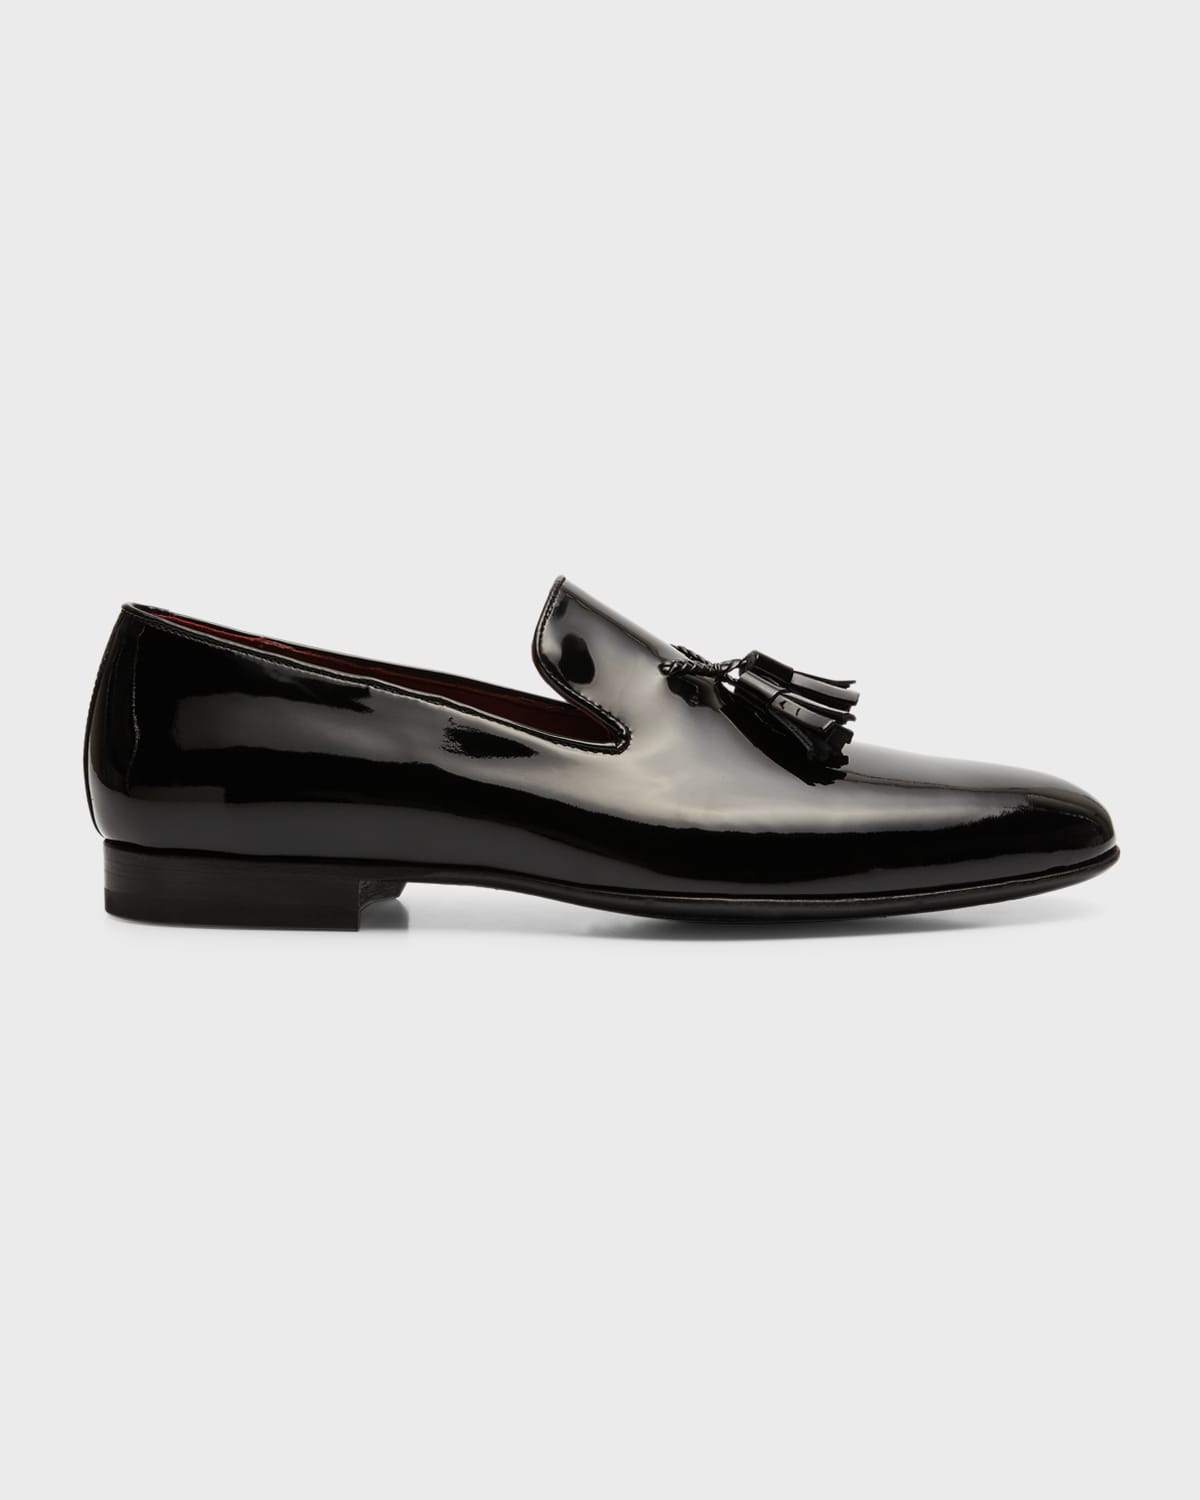 Magnanni Men's Patent Leather Tassel Loafers In Black